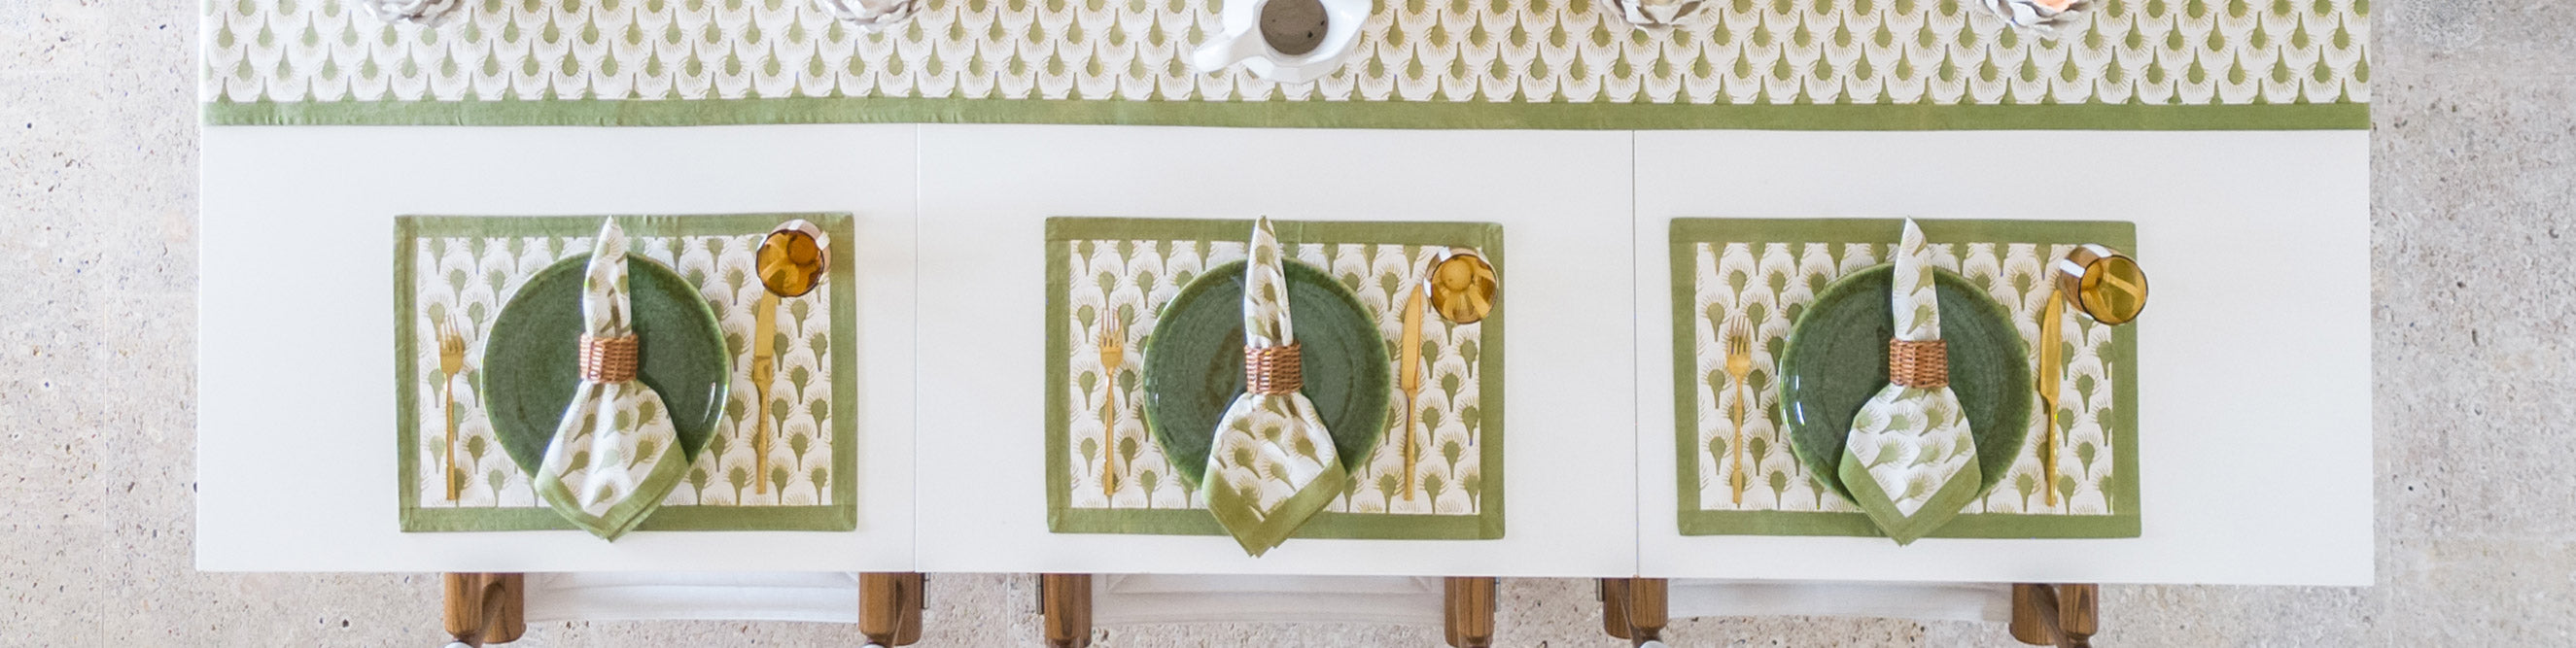 Hand Block Printed & Natural Woven Placemats | Pomegranate Inc.